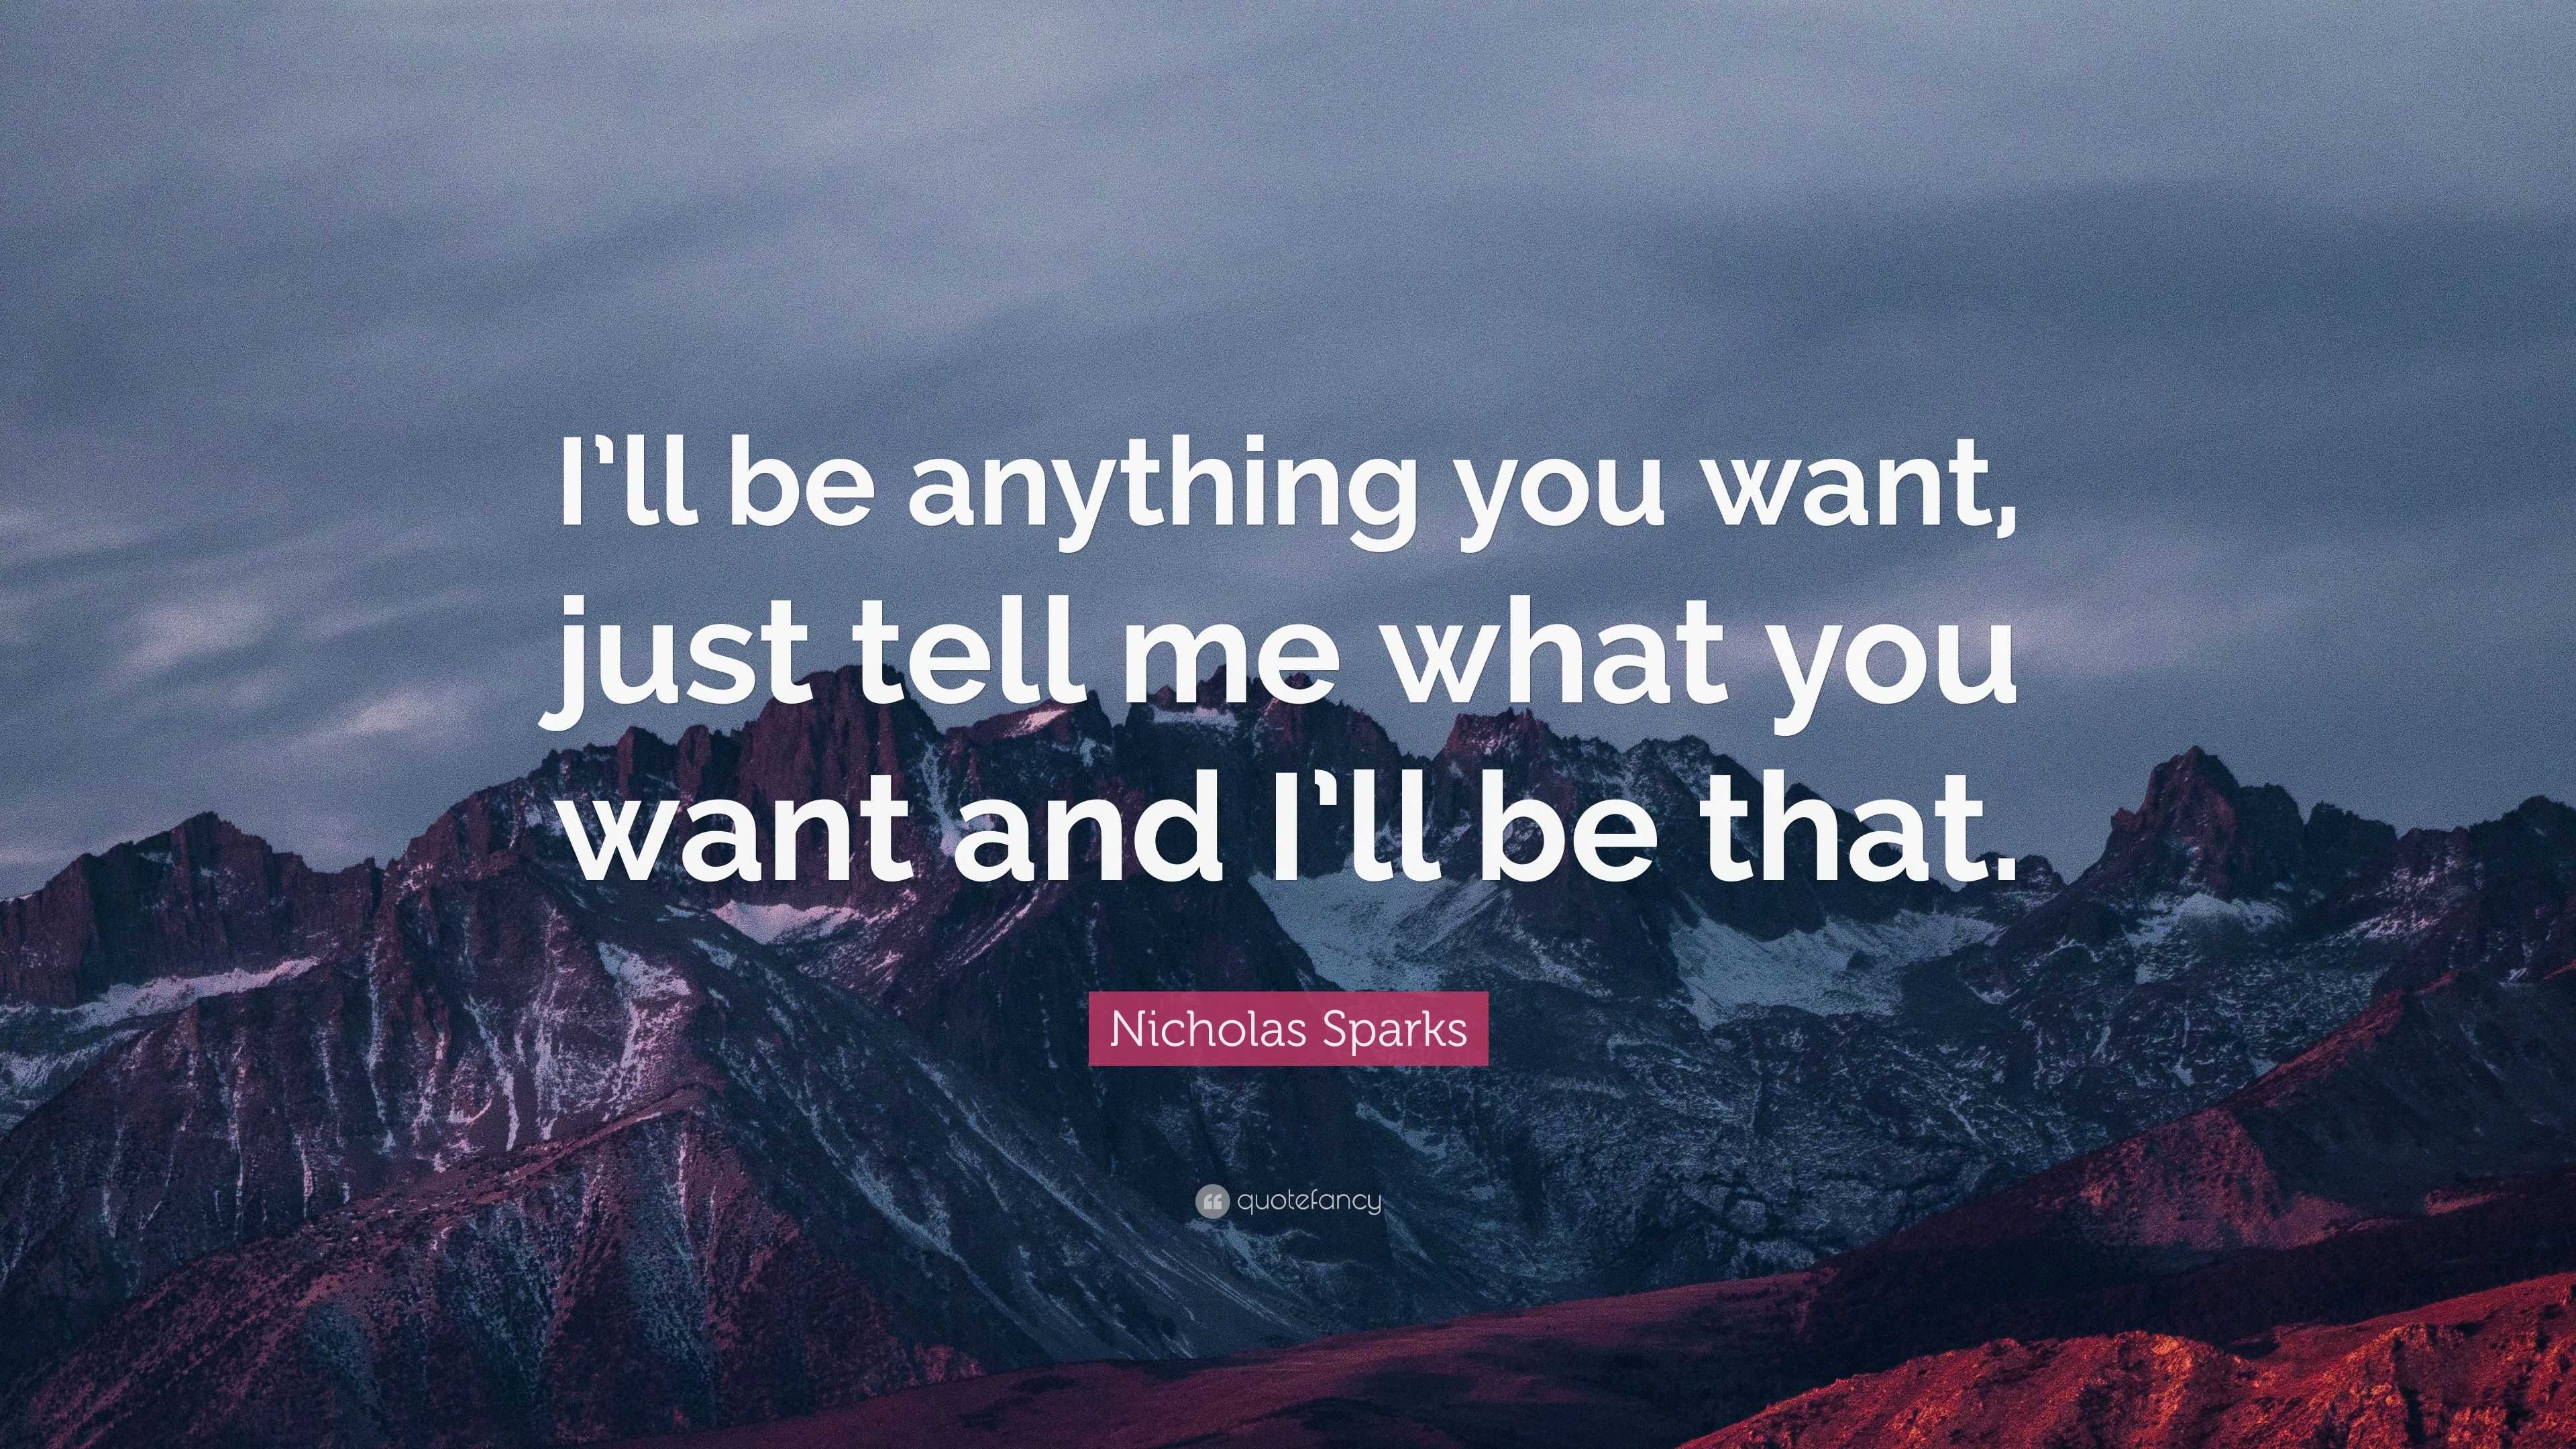 Nicholas Sparks Quote I Ll Be Anything You Want Just Tell Me What You Want And